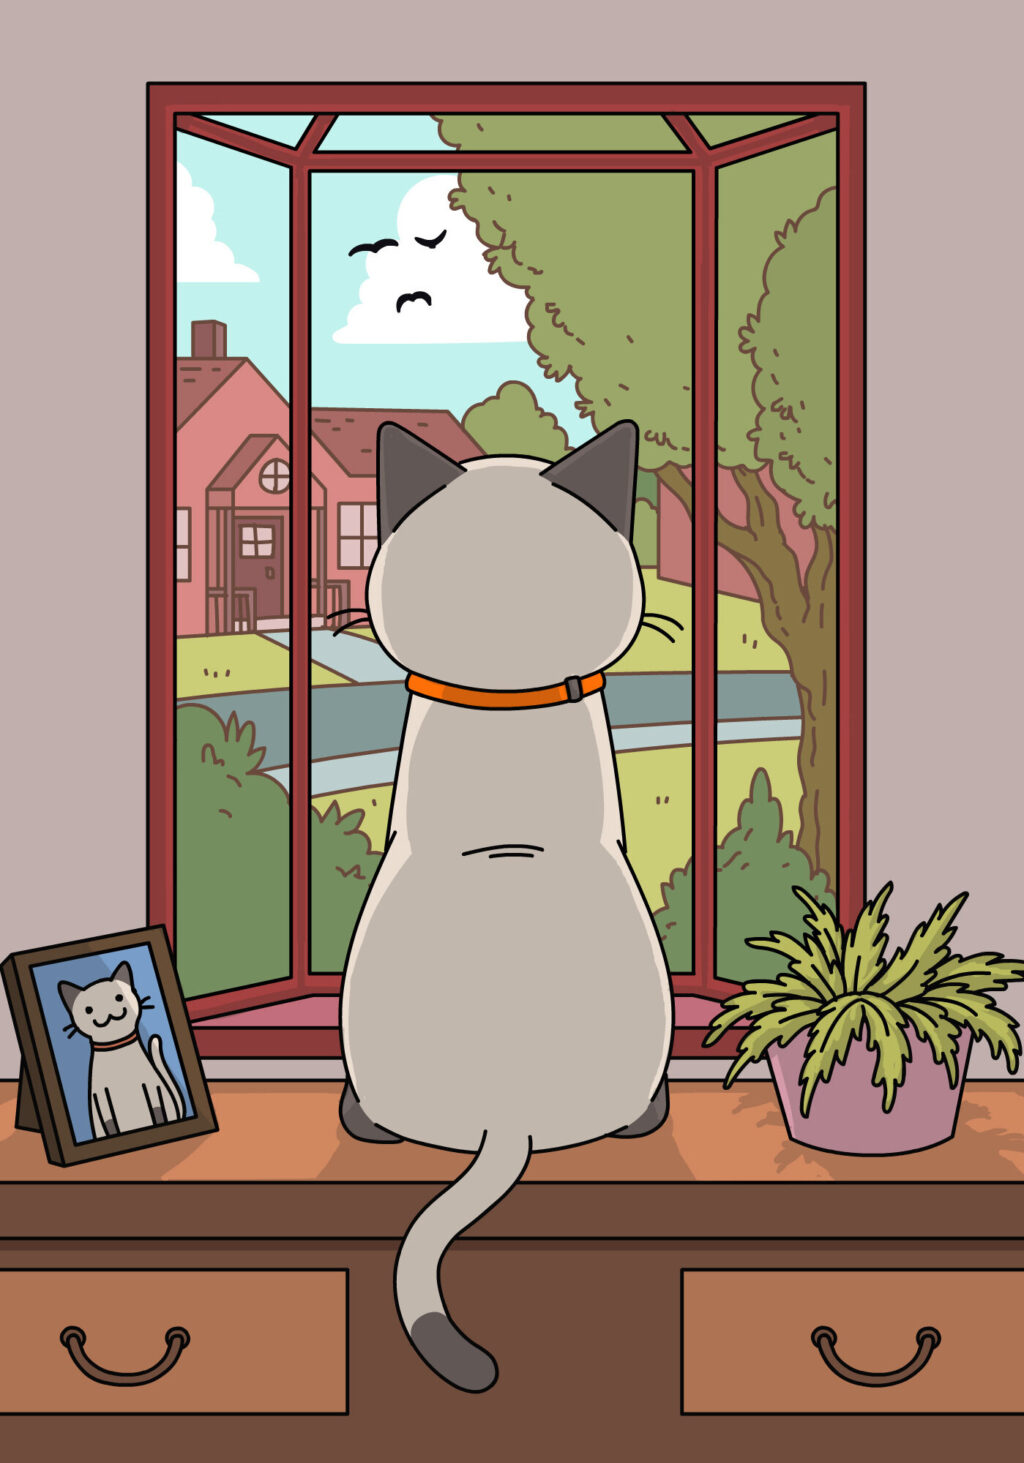 Illustration of a cat, looking out a window, wearing an orange collar for #orangeinside.